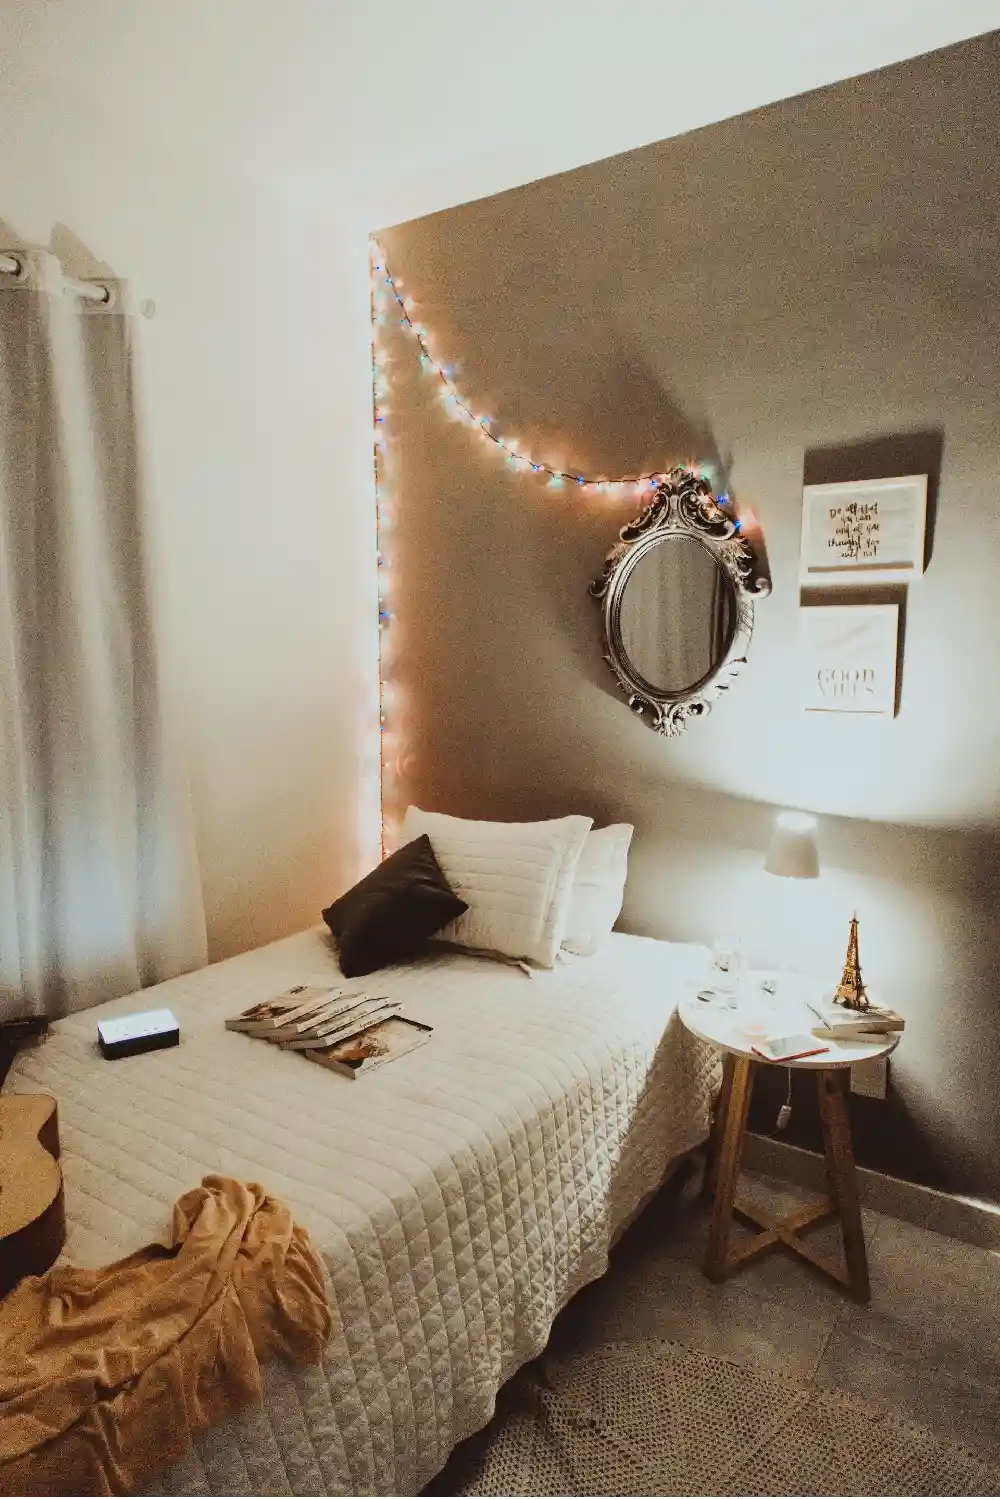 You Don’t Have to Be a Minimalist: 9 Tips for Comfortable Dorm Living